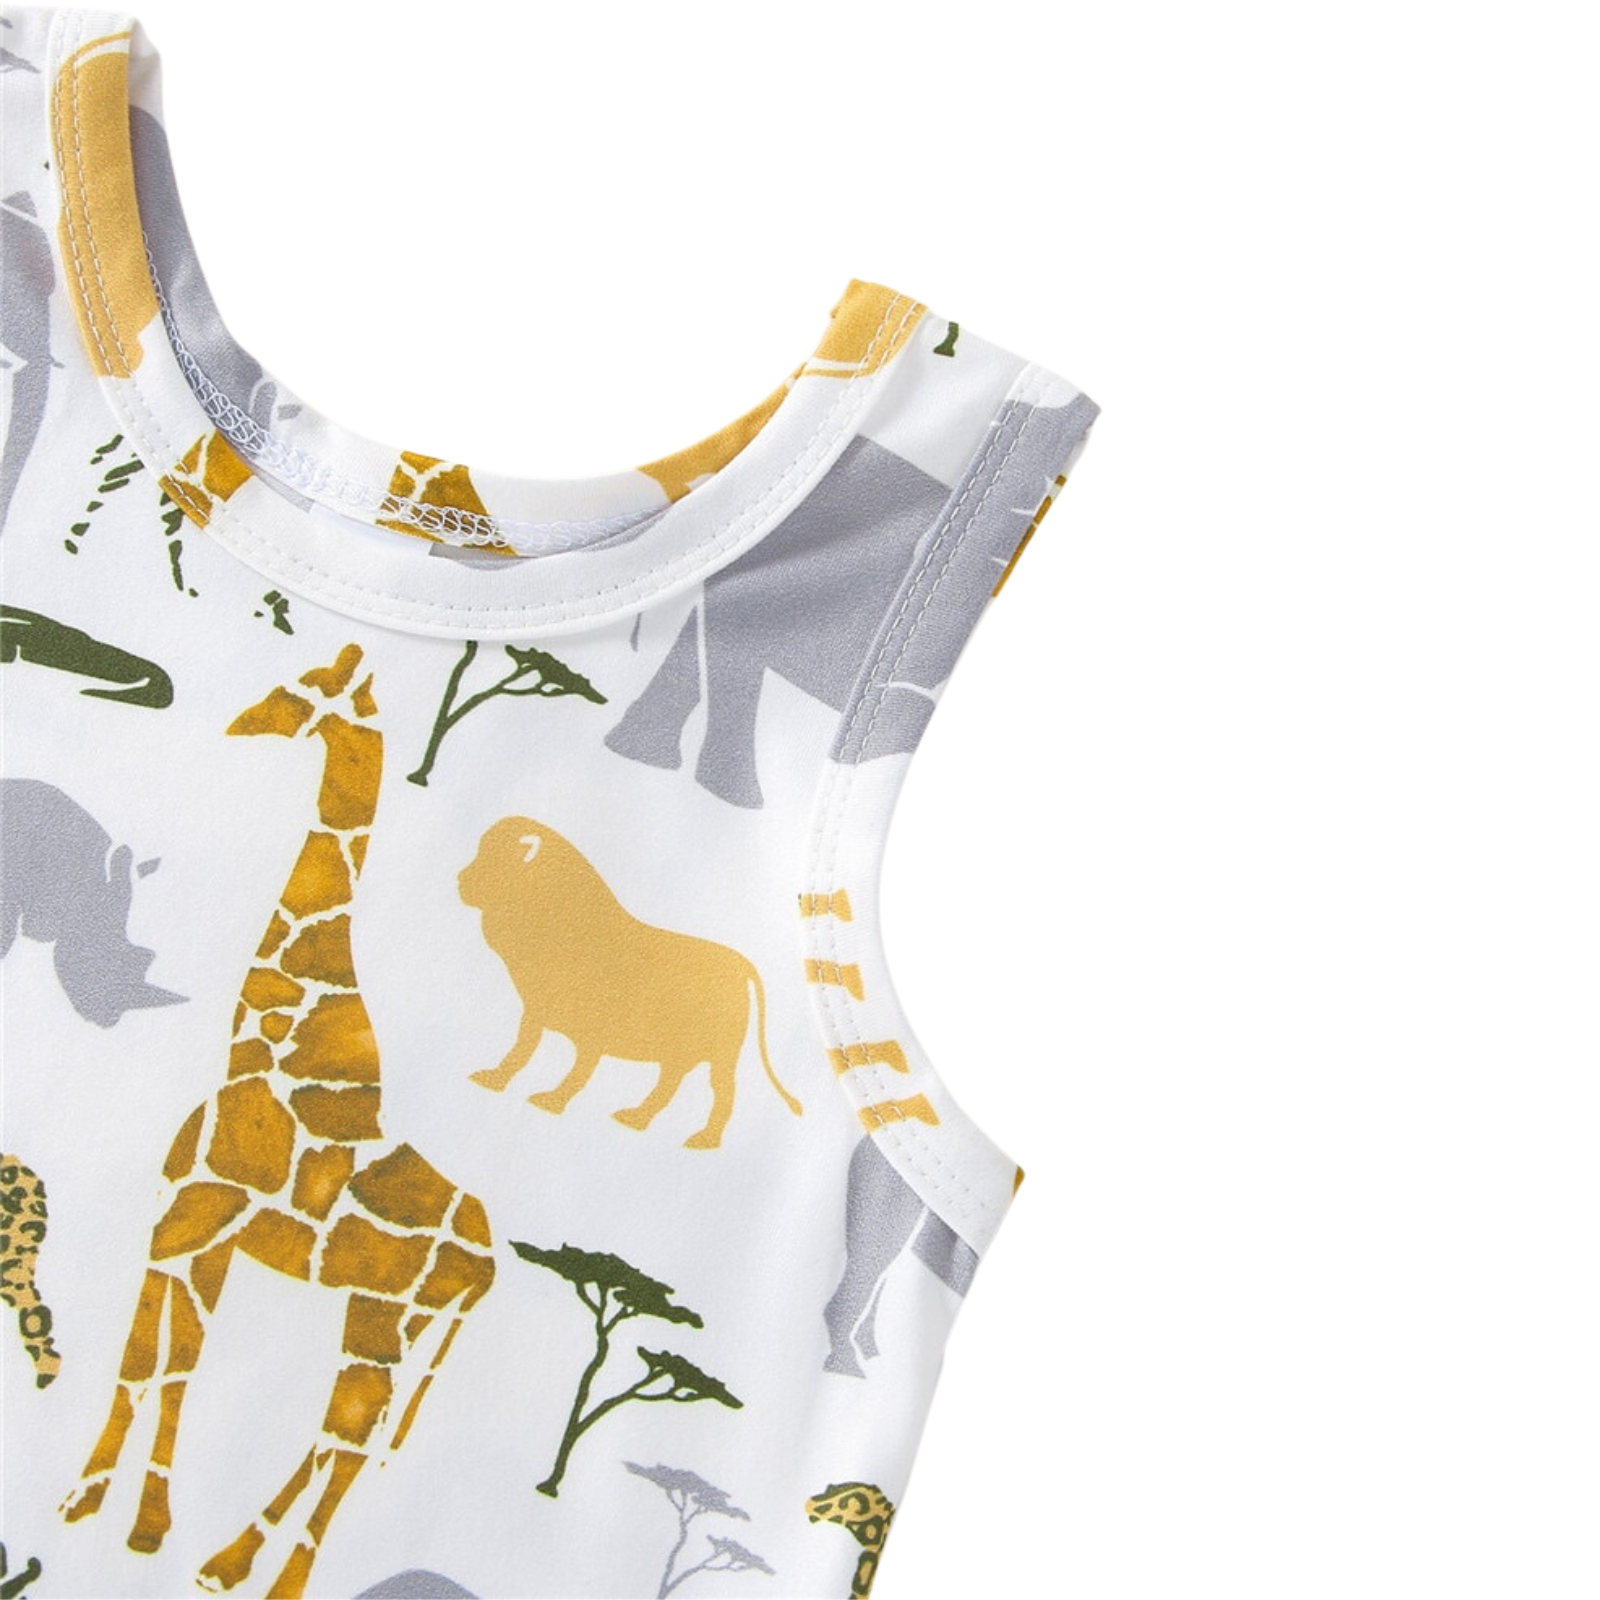 Baby Boy Animal Print Tank Set - My Trendy YoungstersBaby Boy Animal Print Tank Set - My Trendy Youngsters | Buy on-trend and stylish Baby and Toddler Clothing Sets @ My Trendy Youngsters - Dress your little one in Style @ My Trendy Youngsters